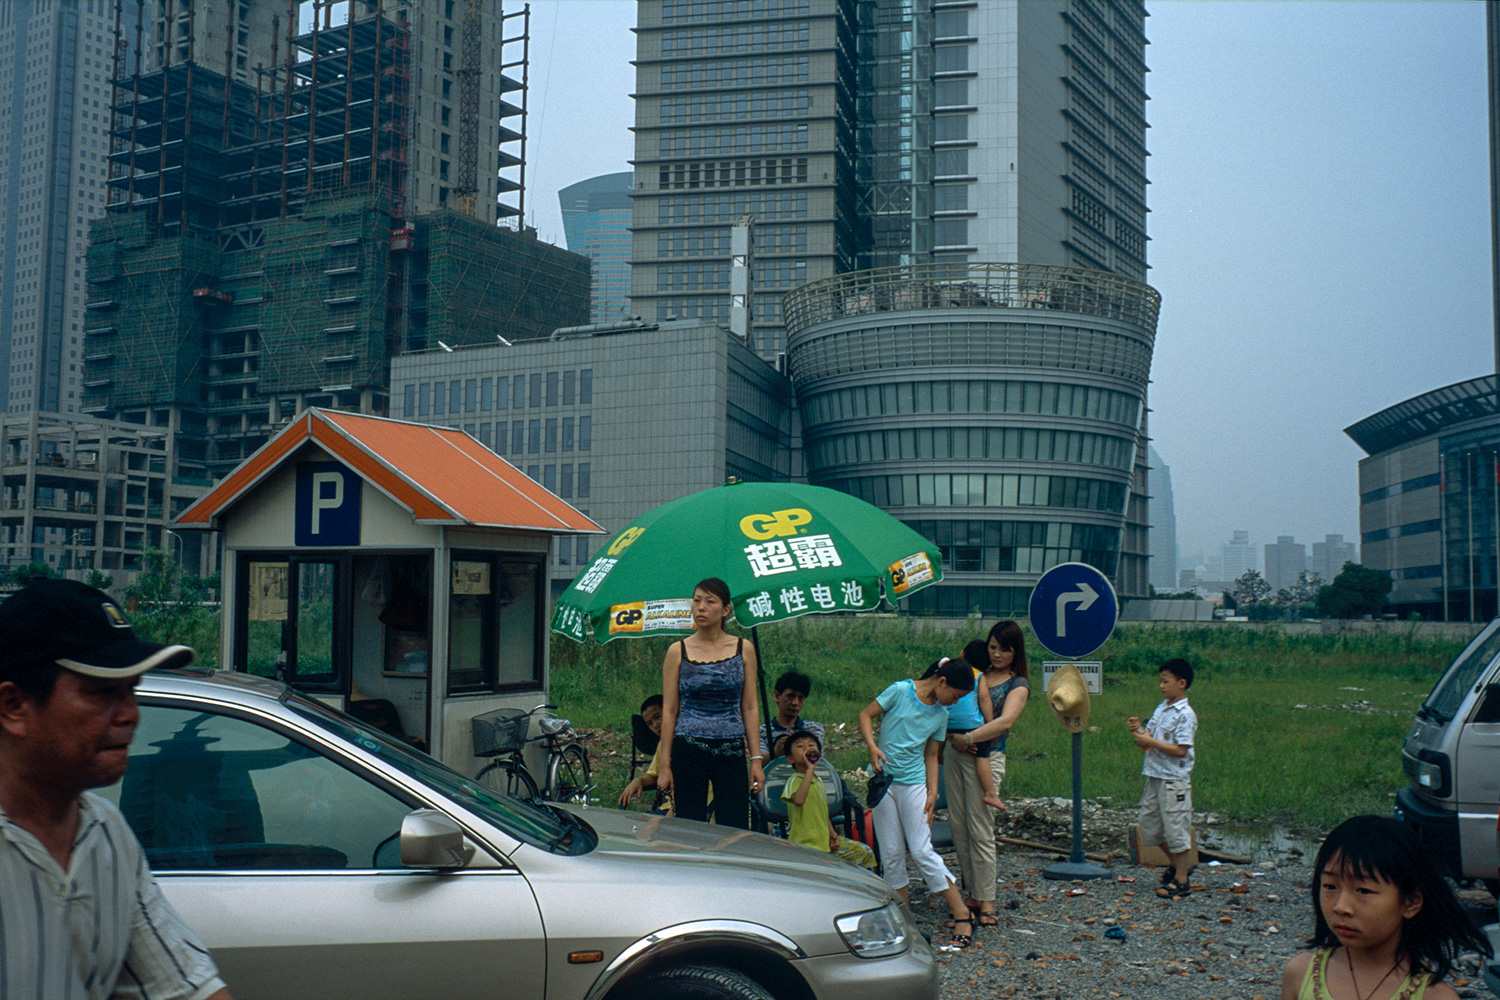 A building site in Lujiazui becomes an impromptu parking lot when construction there stalled, 2003.